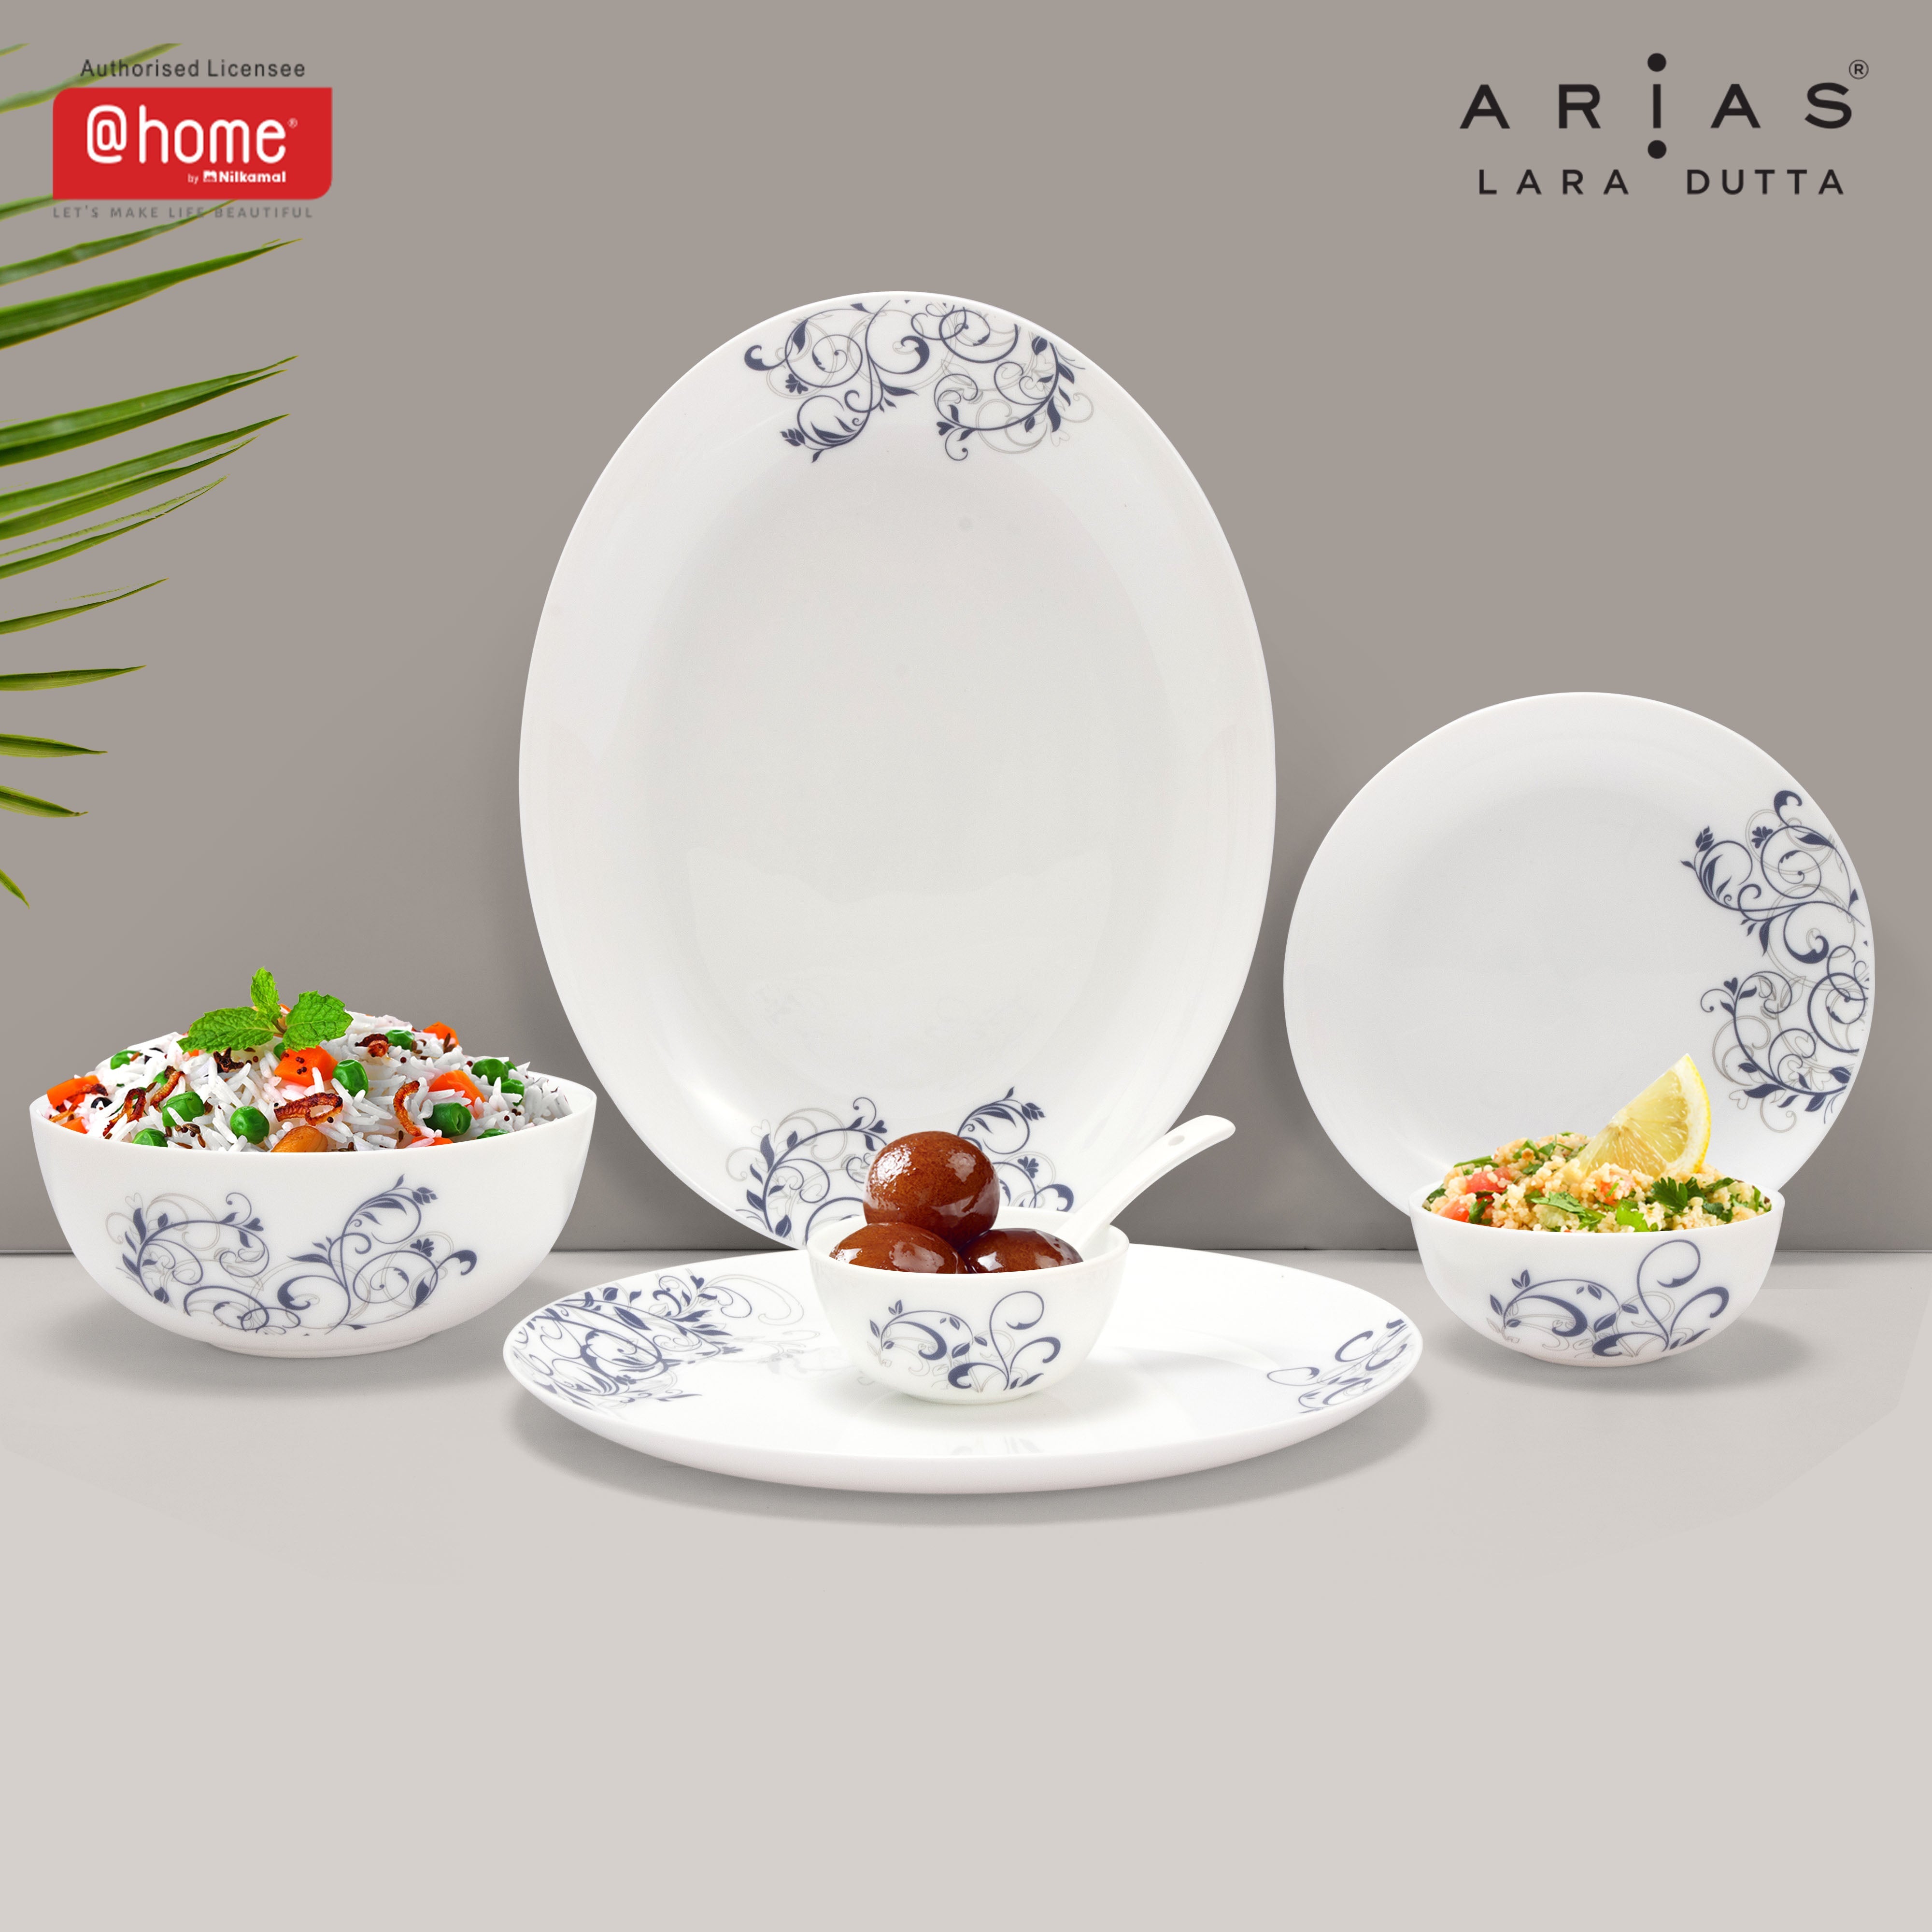 Everything About Crockery Set, Nilkamal At-home @home